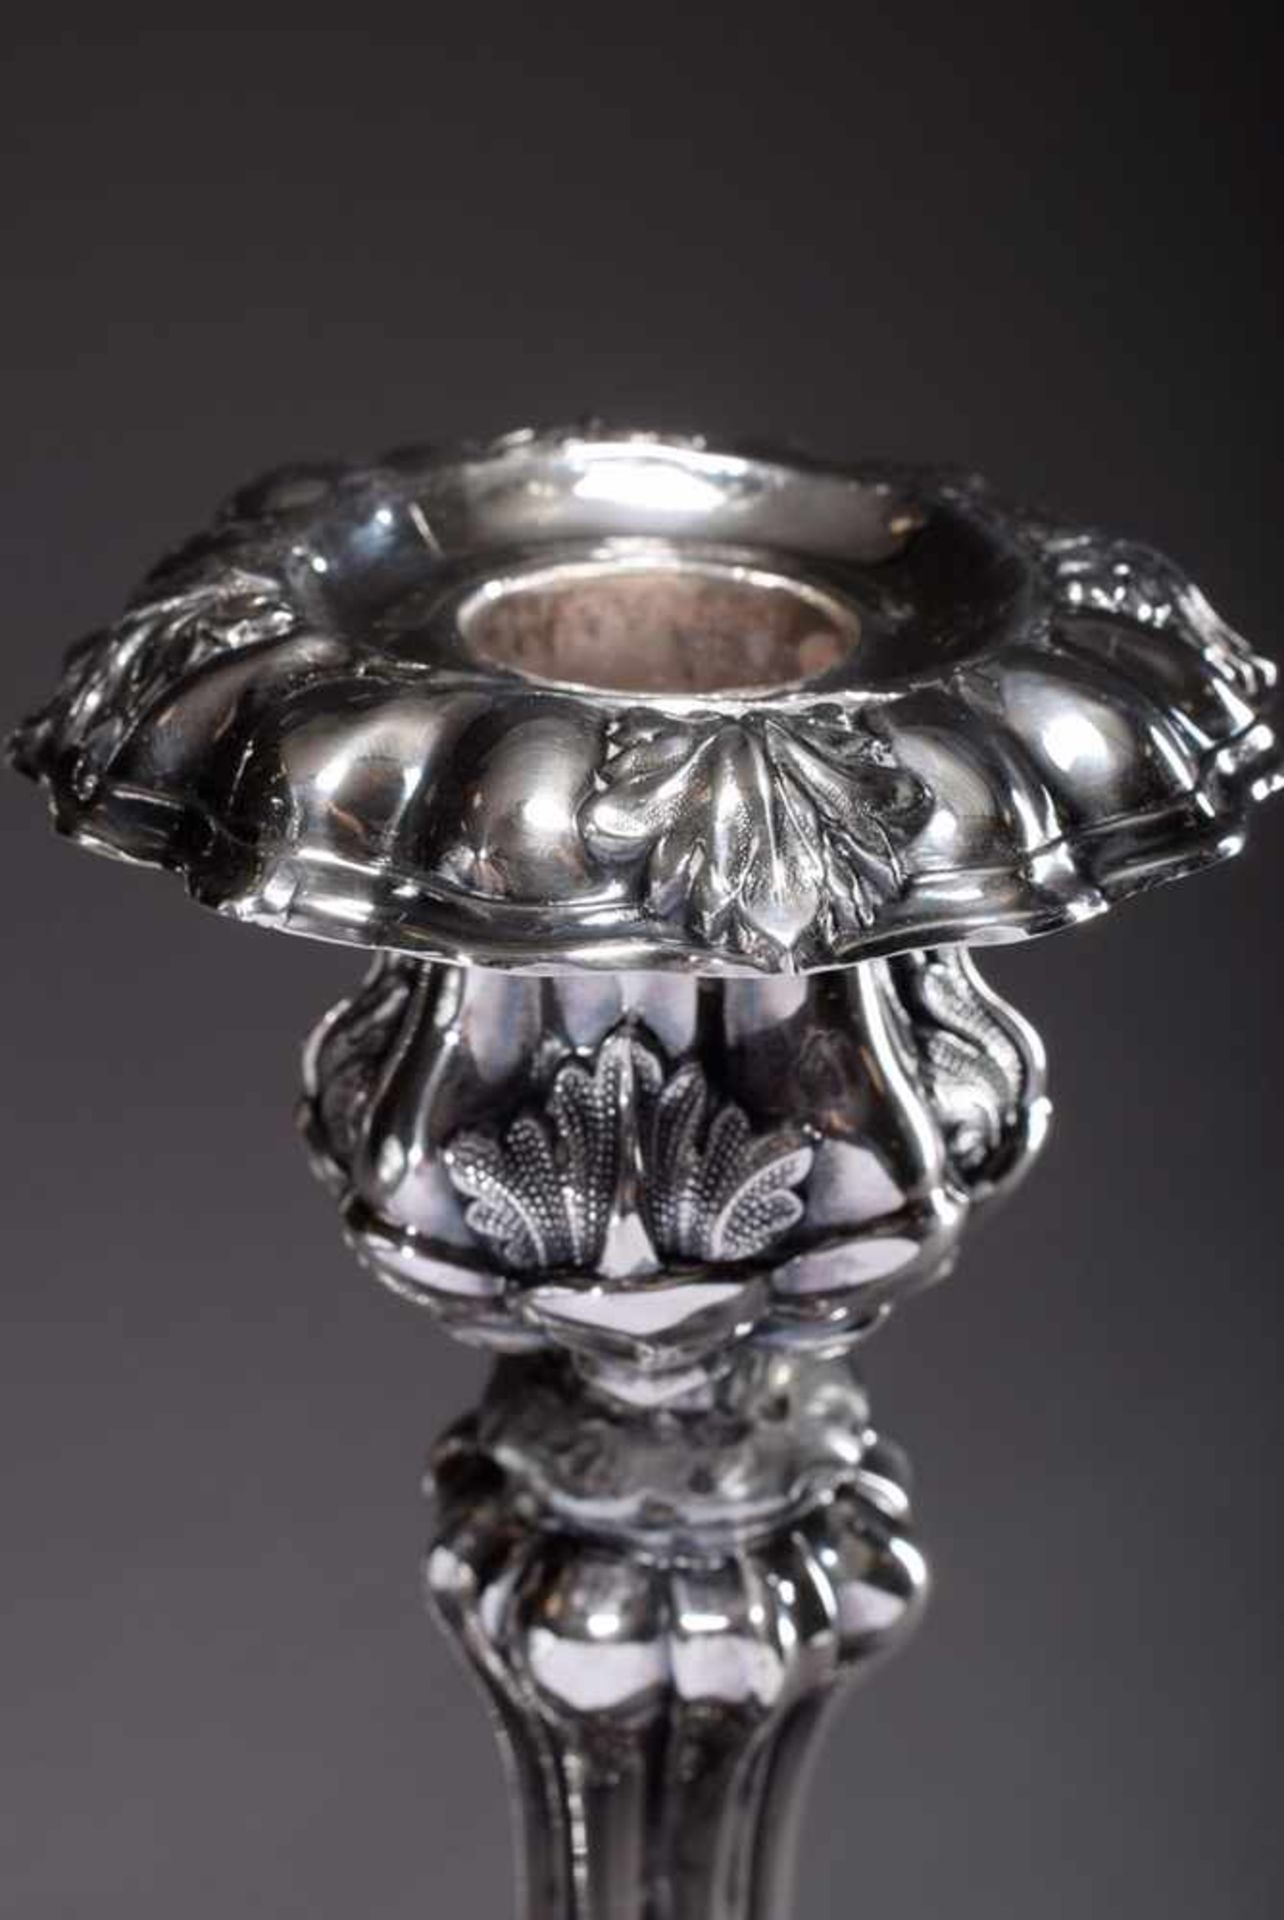 Pair of candlesticks in late Biedermeier Façon, silver 800 (filled), hallmark rubbed off, end of - Bild 3 aus 4